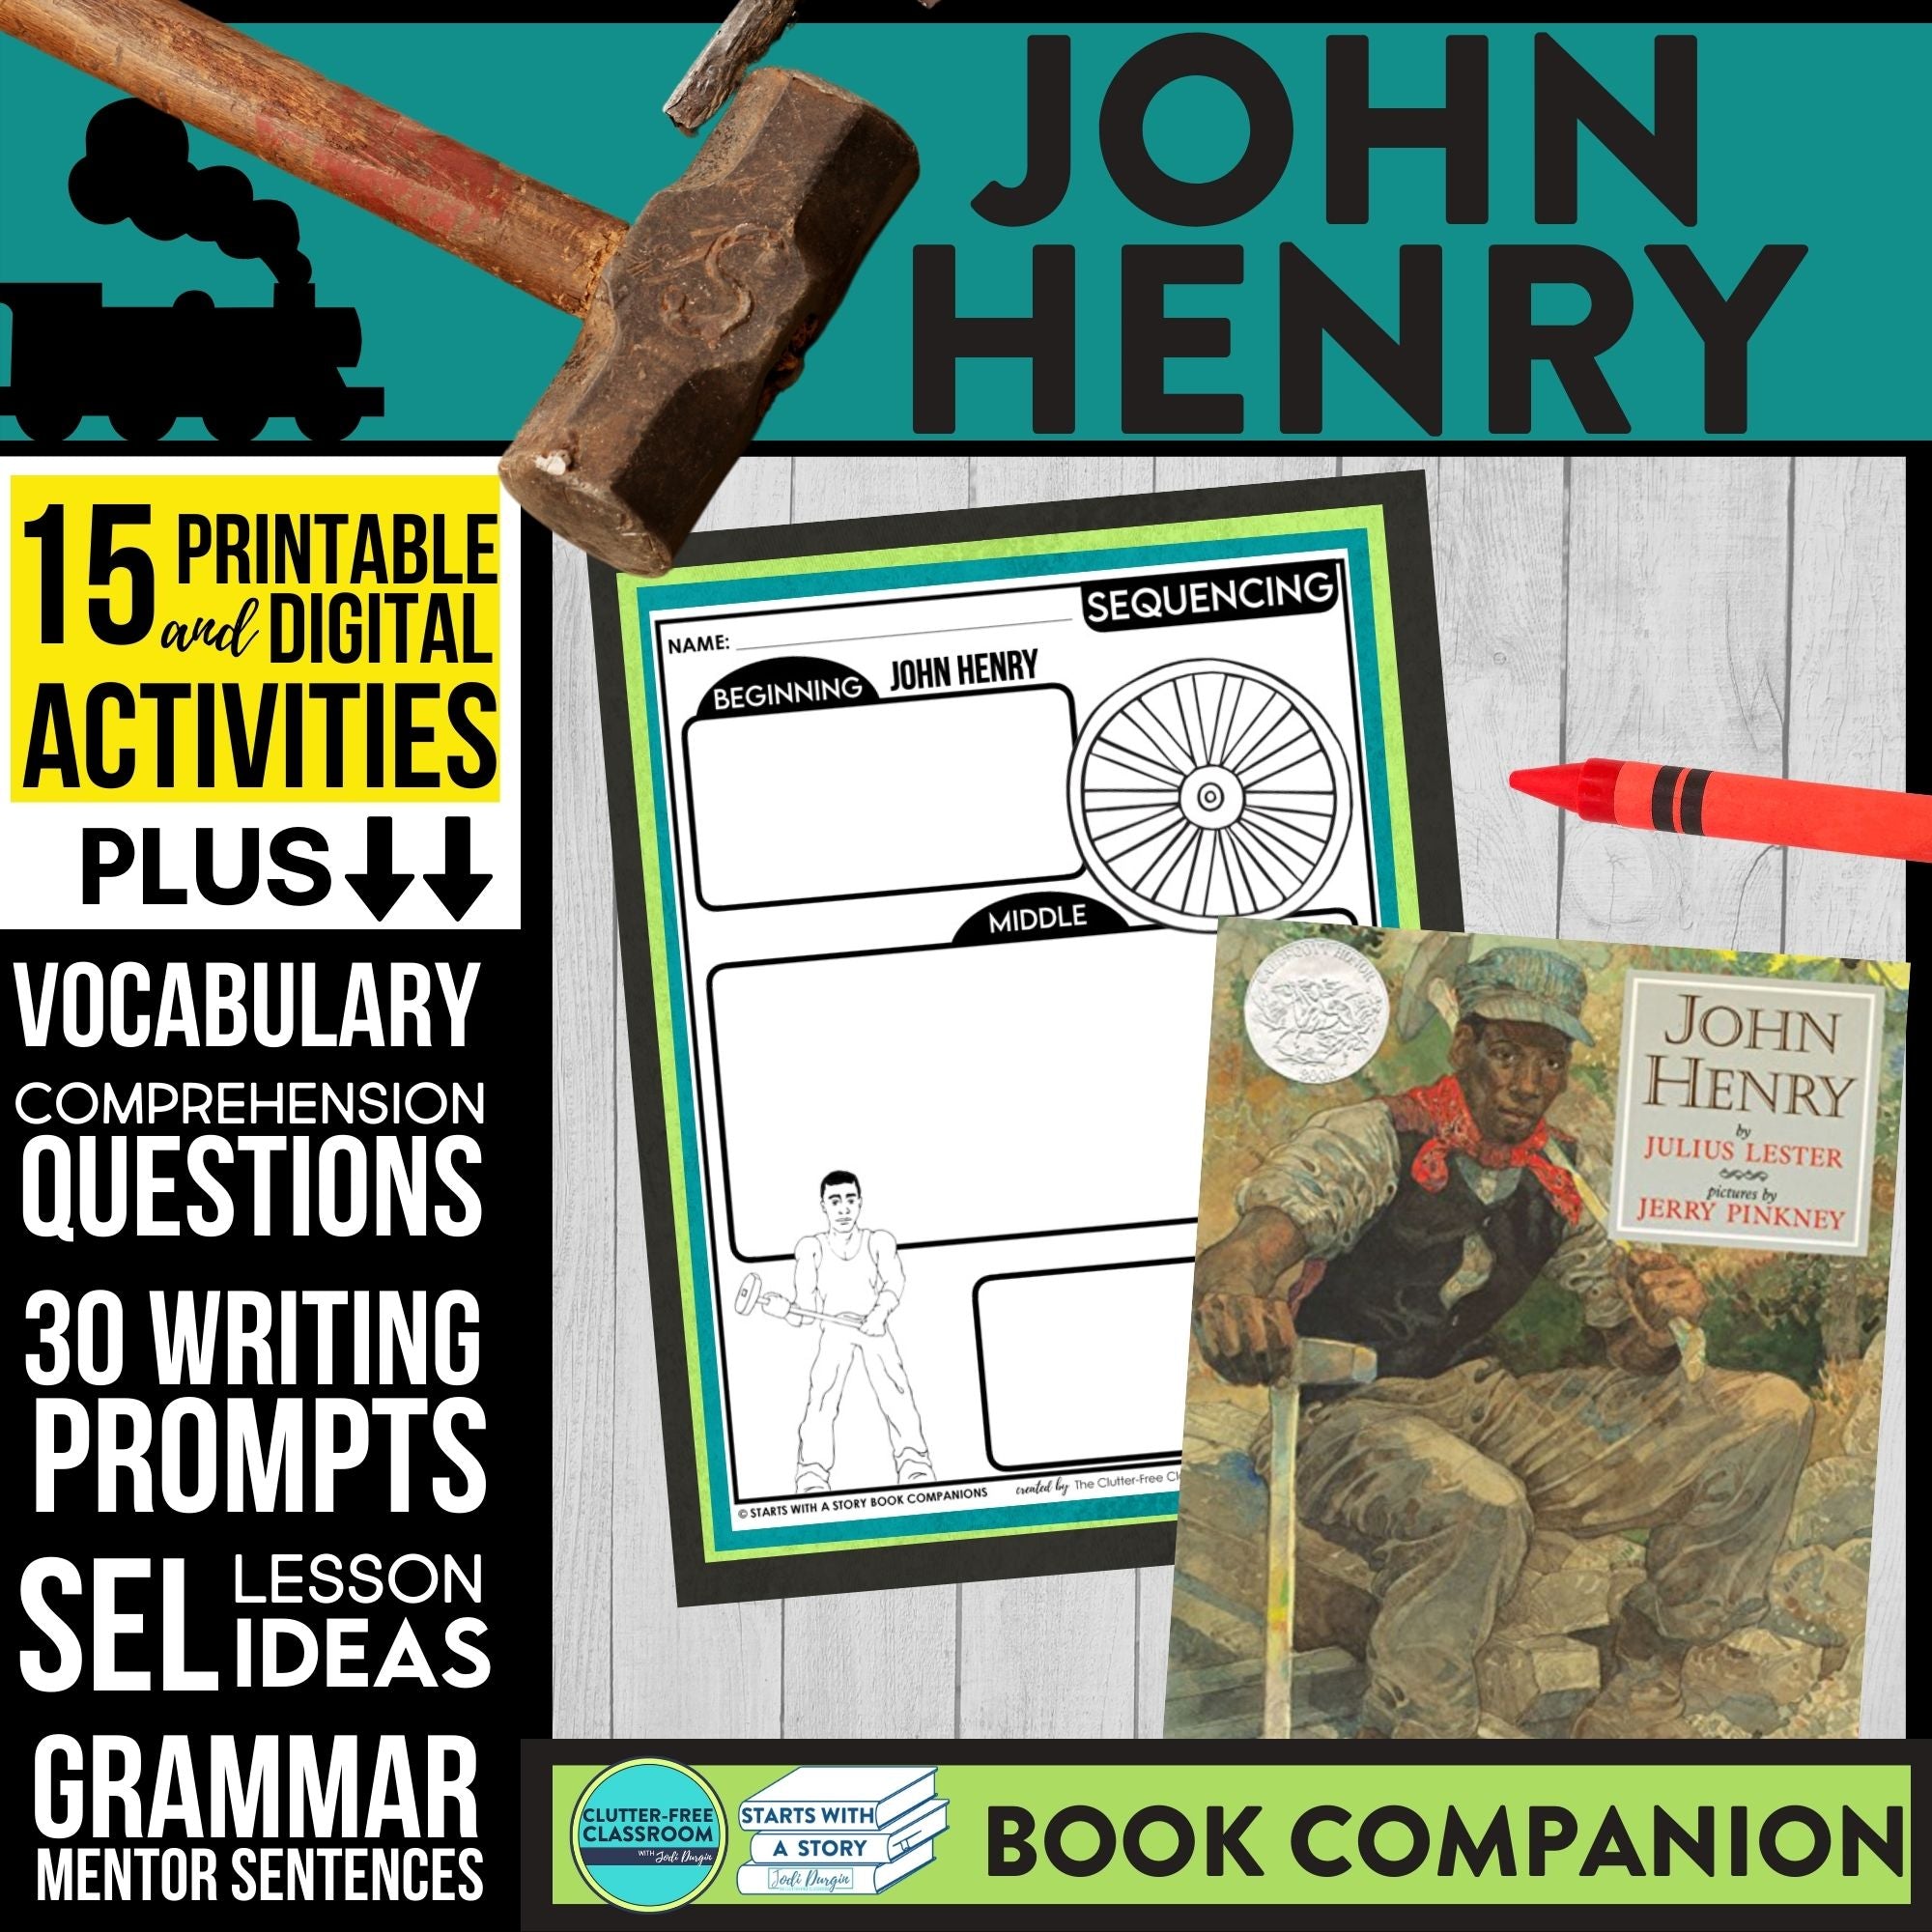 JOHN HENRY activities and lesson plan ideas